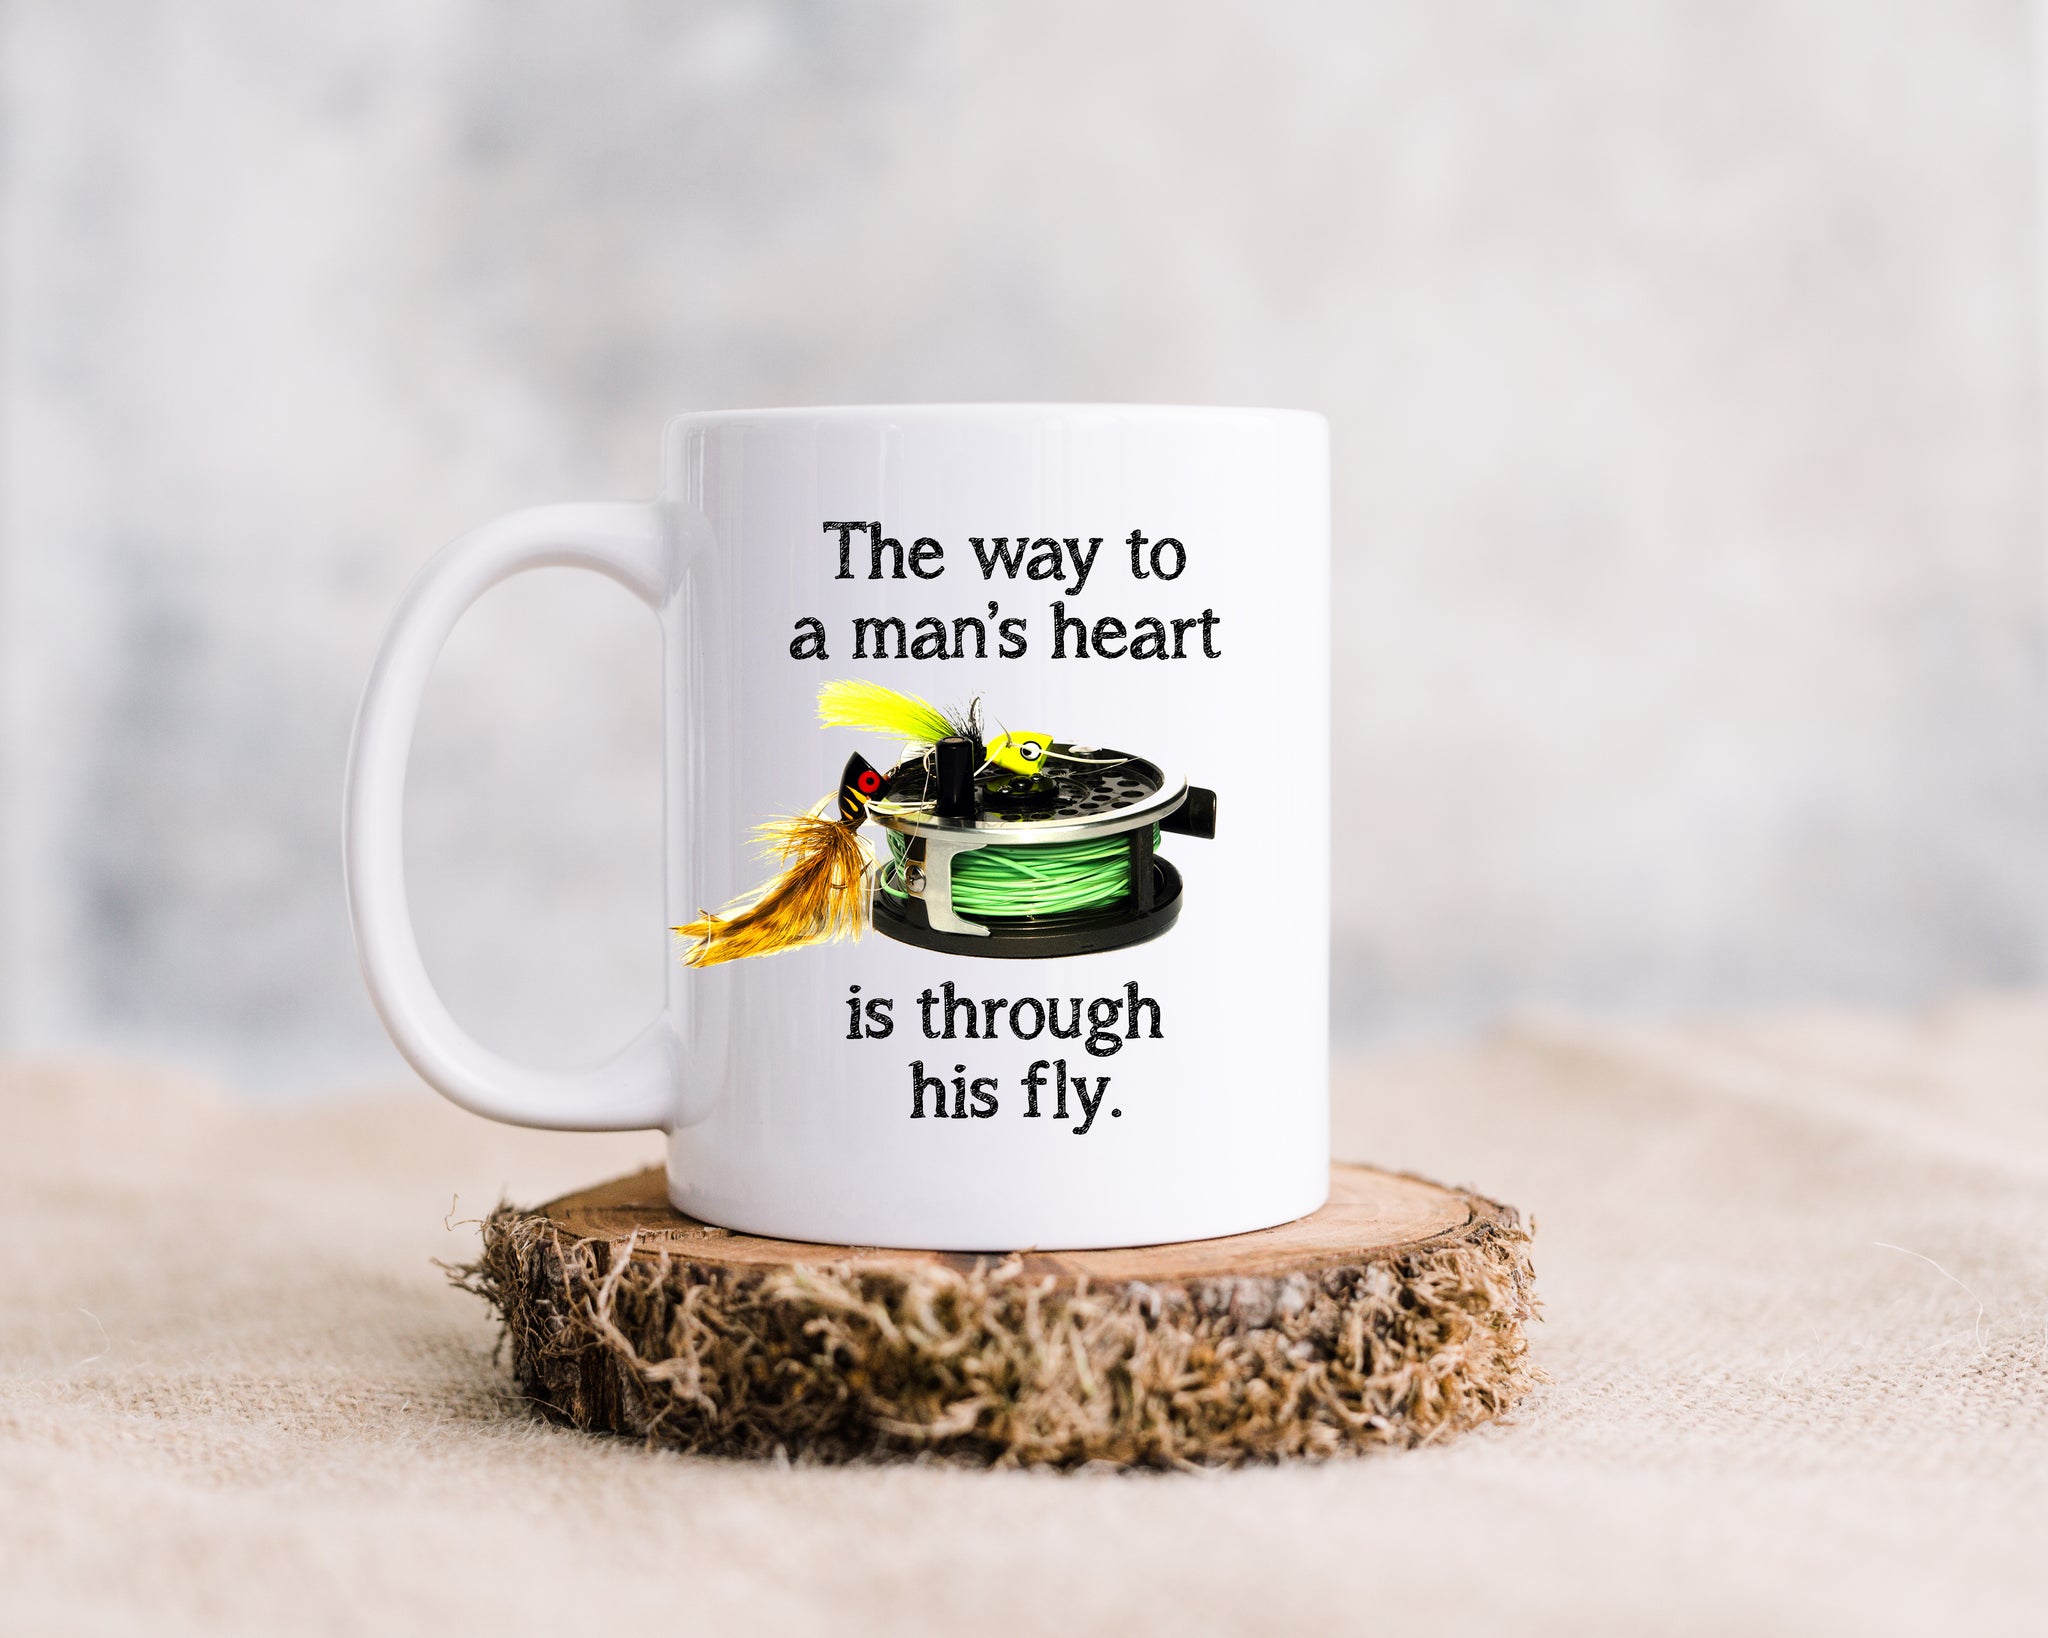 A Way to a Man's Heart is Through His Fly - Ceramic Mug with Fly